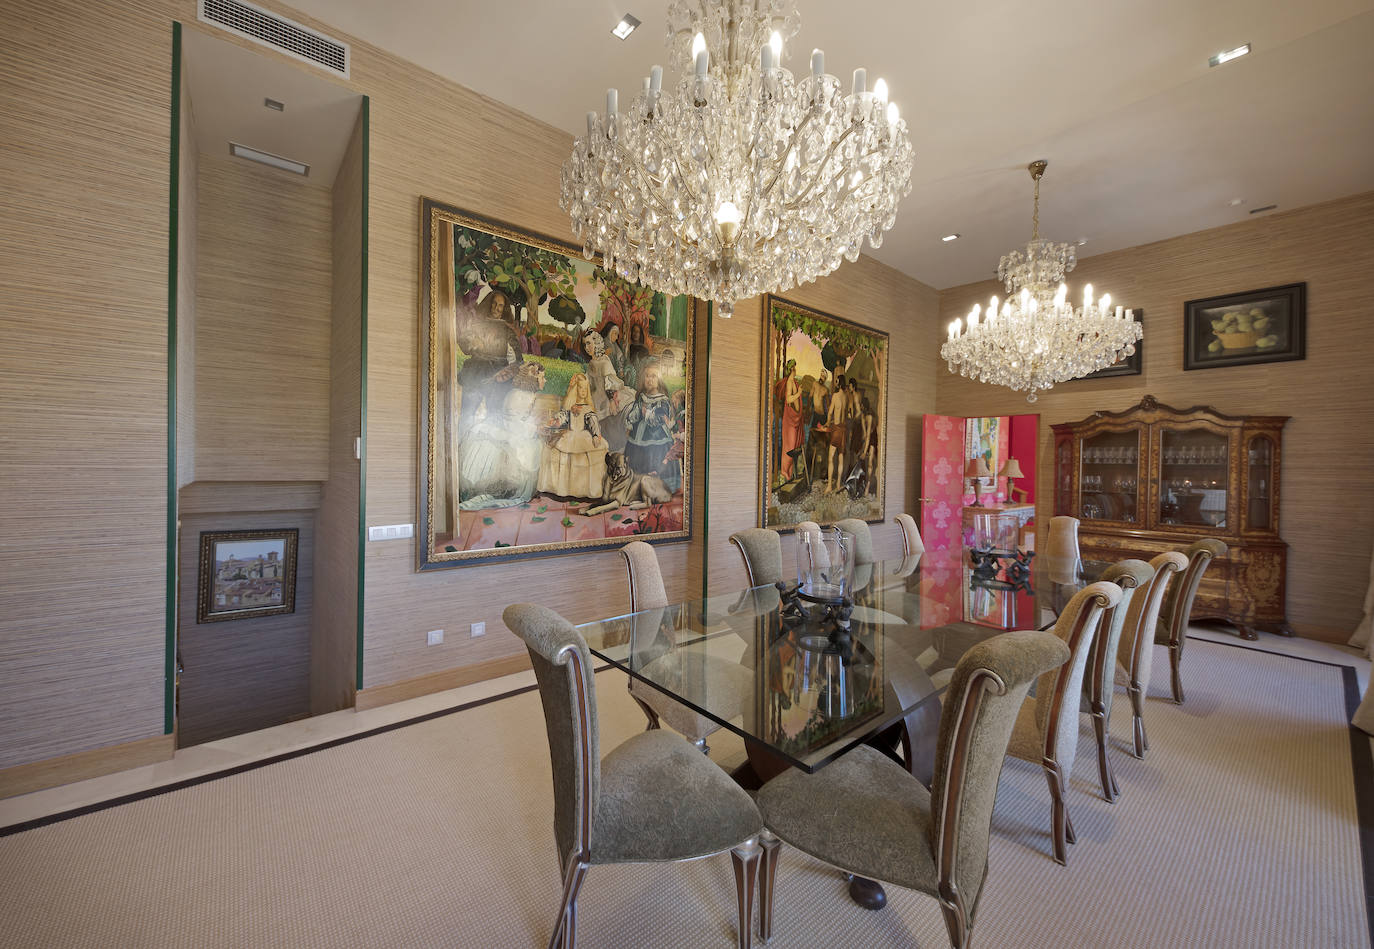 Take a tour of the most expensive pre-owned apartment in Malaga, in pictures